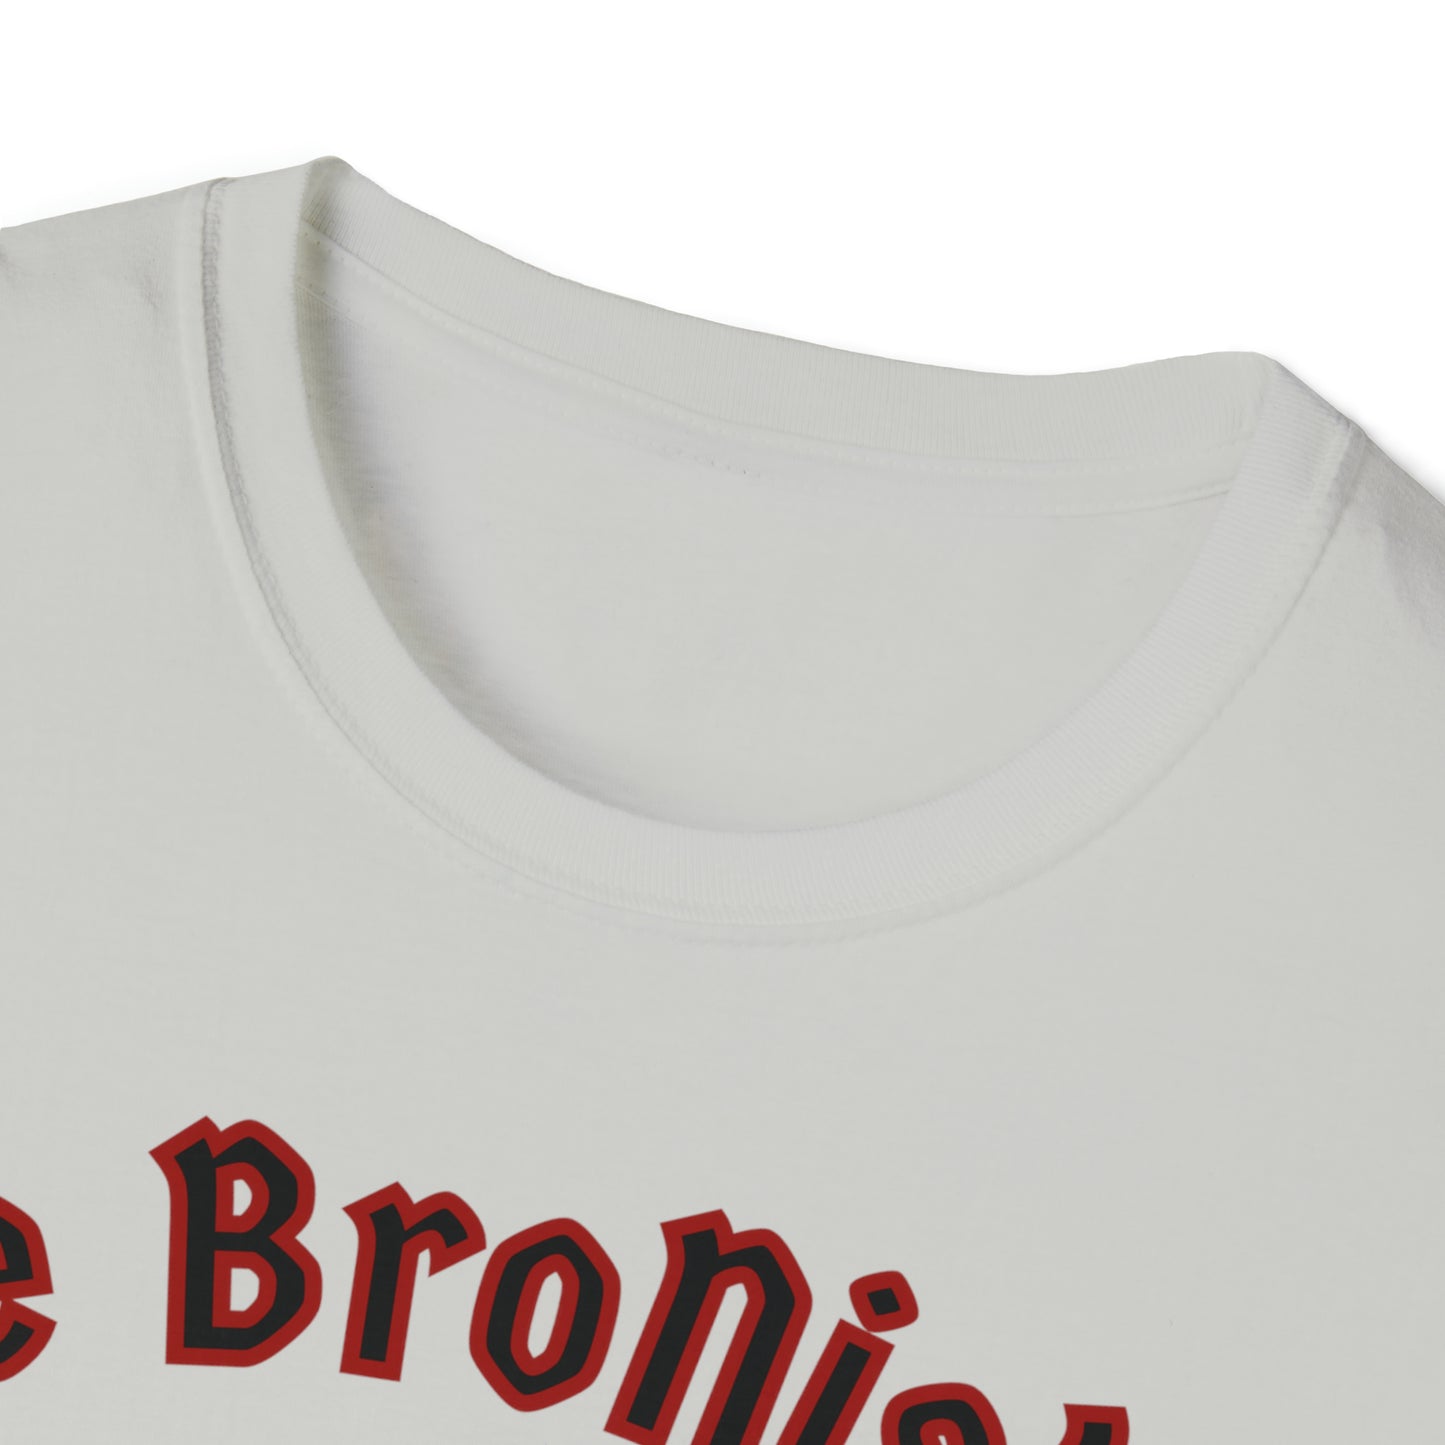 The Bronisher #1 Unisex Softstyle T-Shirt, Bold Personality Tee, Motivational Workout Apparel, Superhero Unisex wear, Vibrant Shirt Graphic, Gift for Gym Goers, Unique statement T shirt,Premium Quality Apparel, Trendy Graphic T-Shirt,Bold Personality Tee